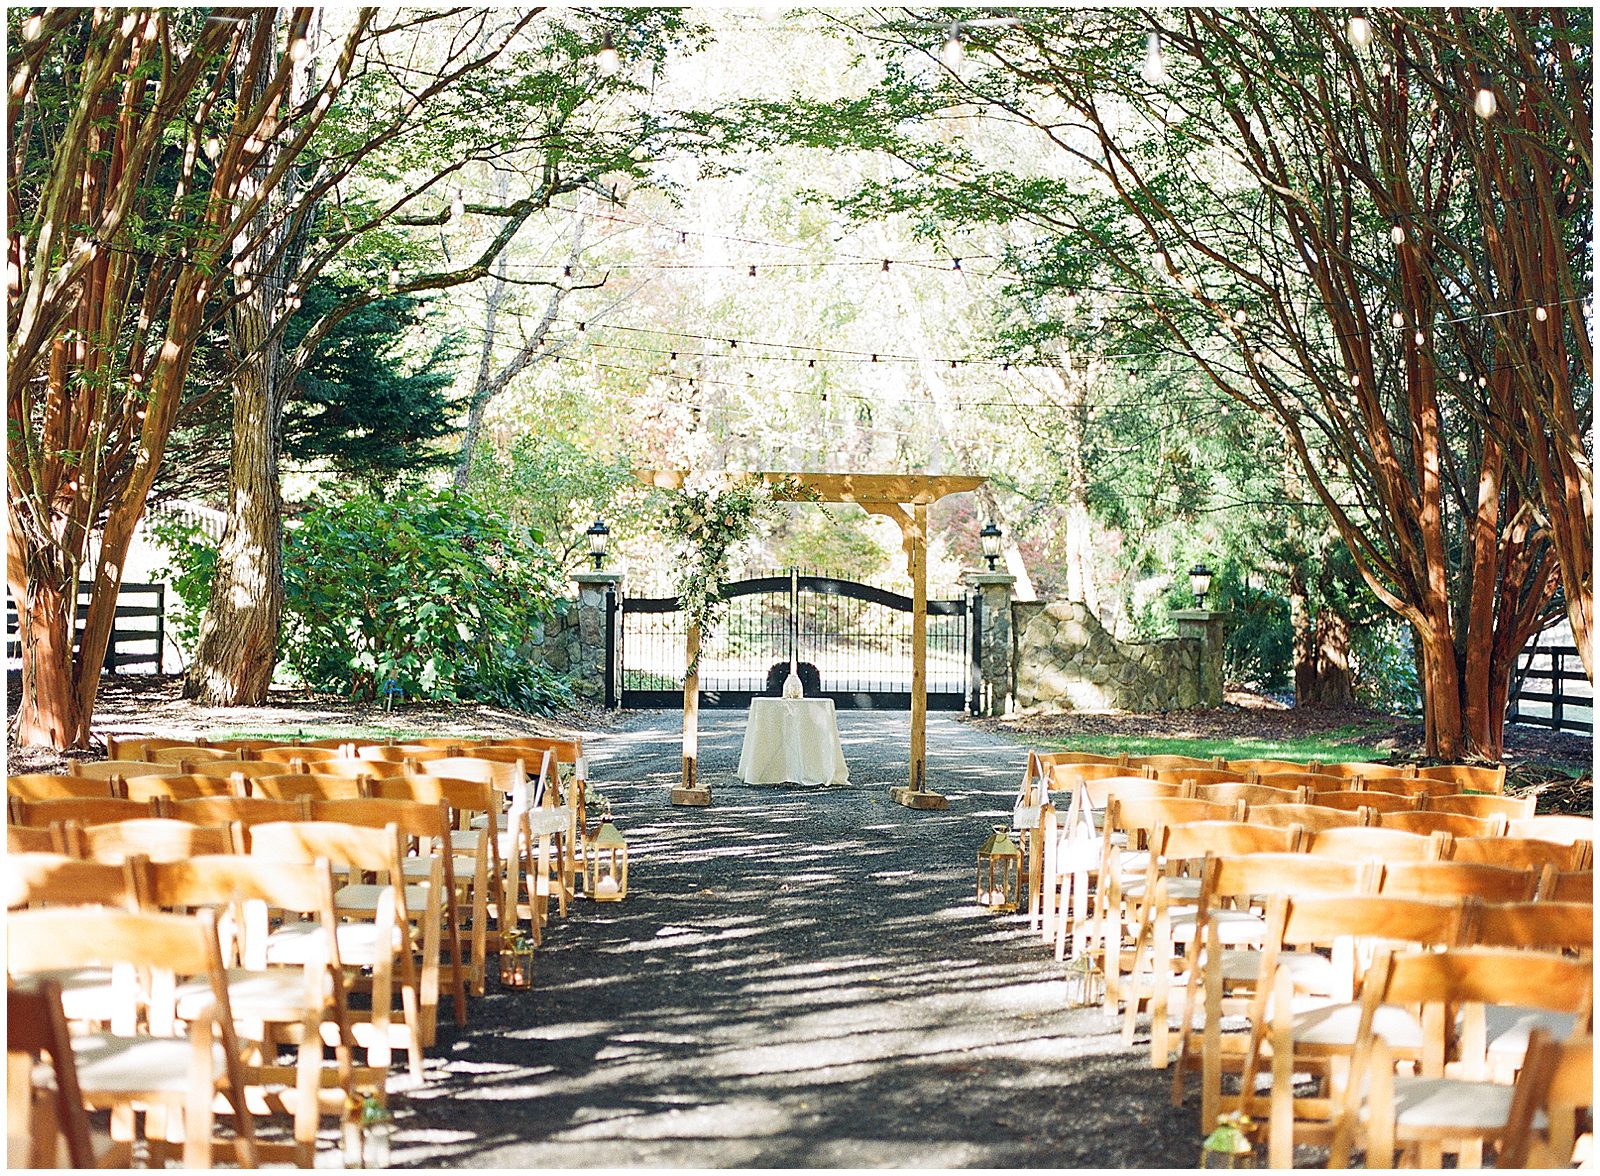 Fall Hawkesdene Wedding Ceremony Site in Driveway Under Trees Photo